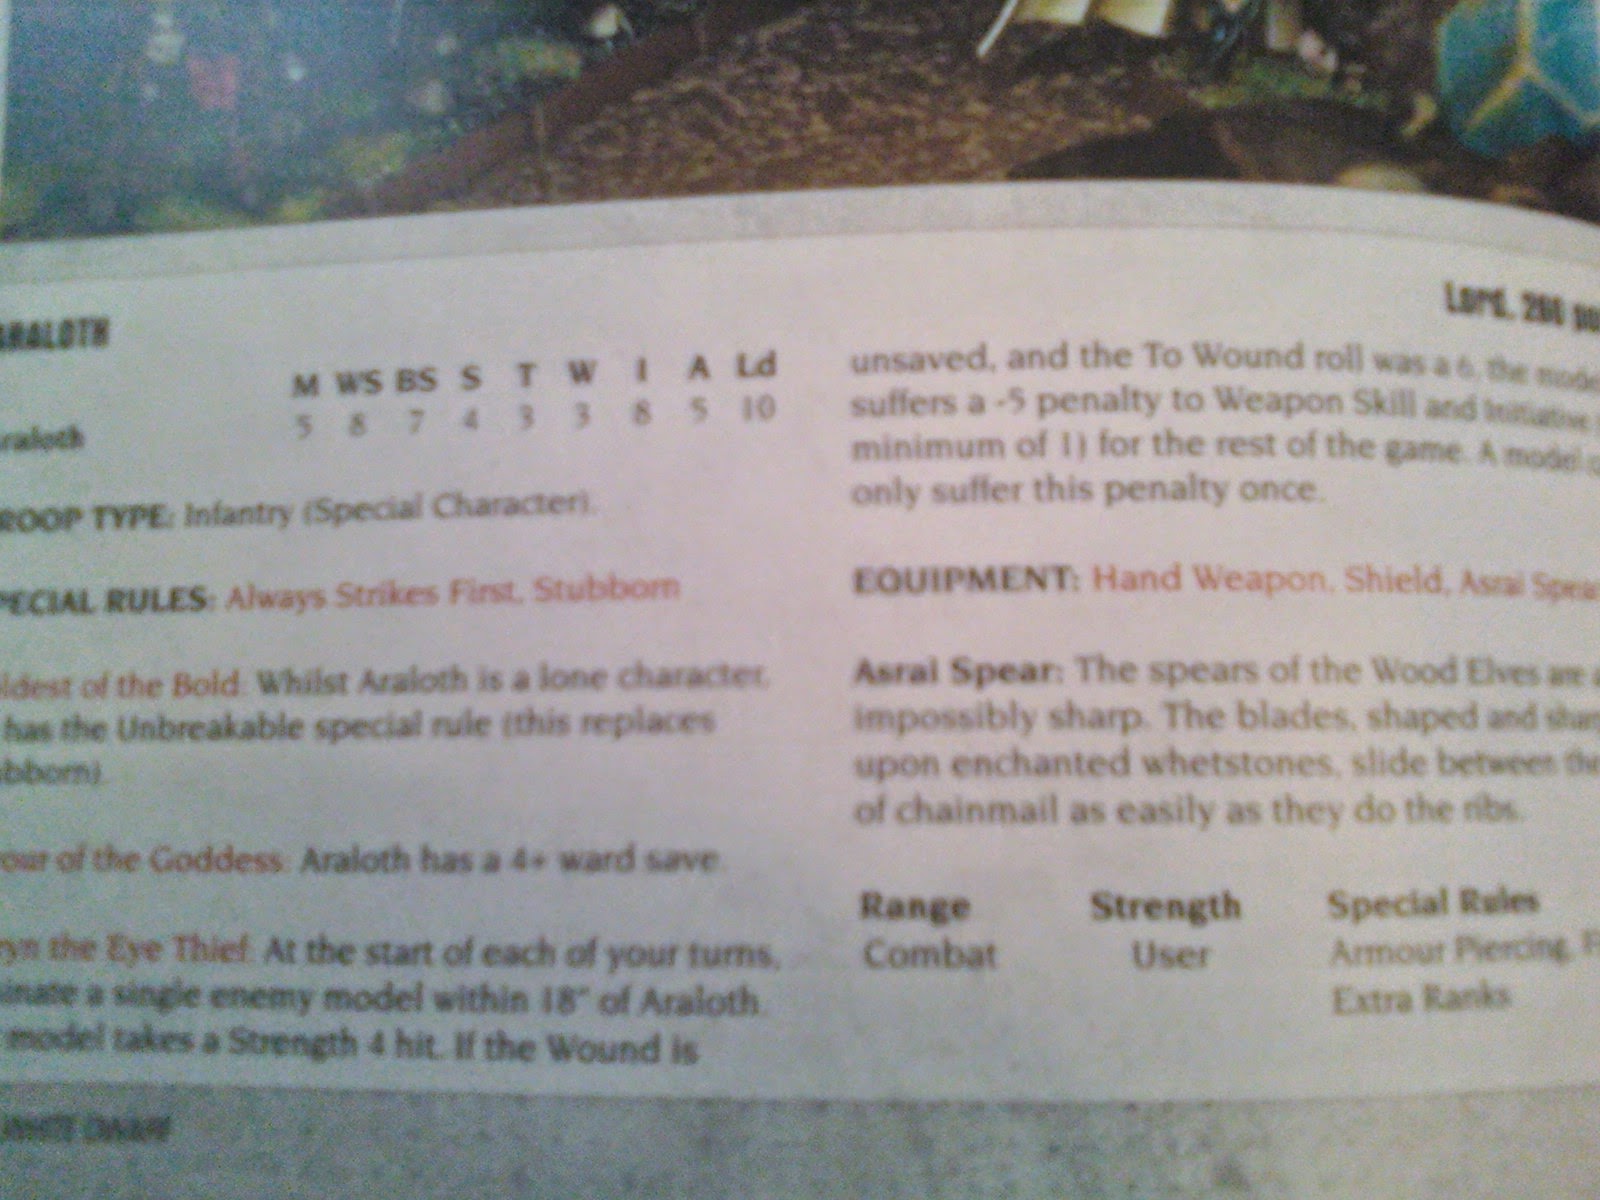 rumores wh - Página 10 Araloth+rules+new+wood+elves+special+character+white+dwarf